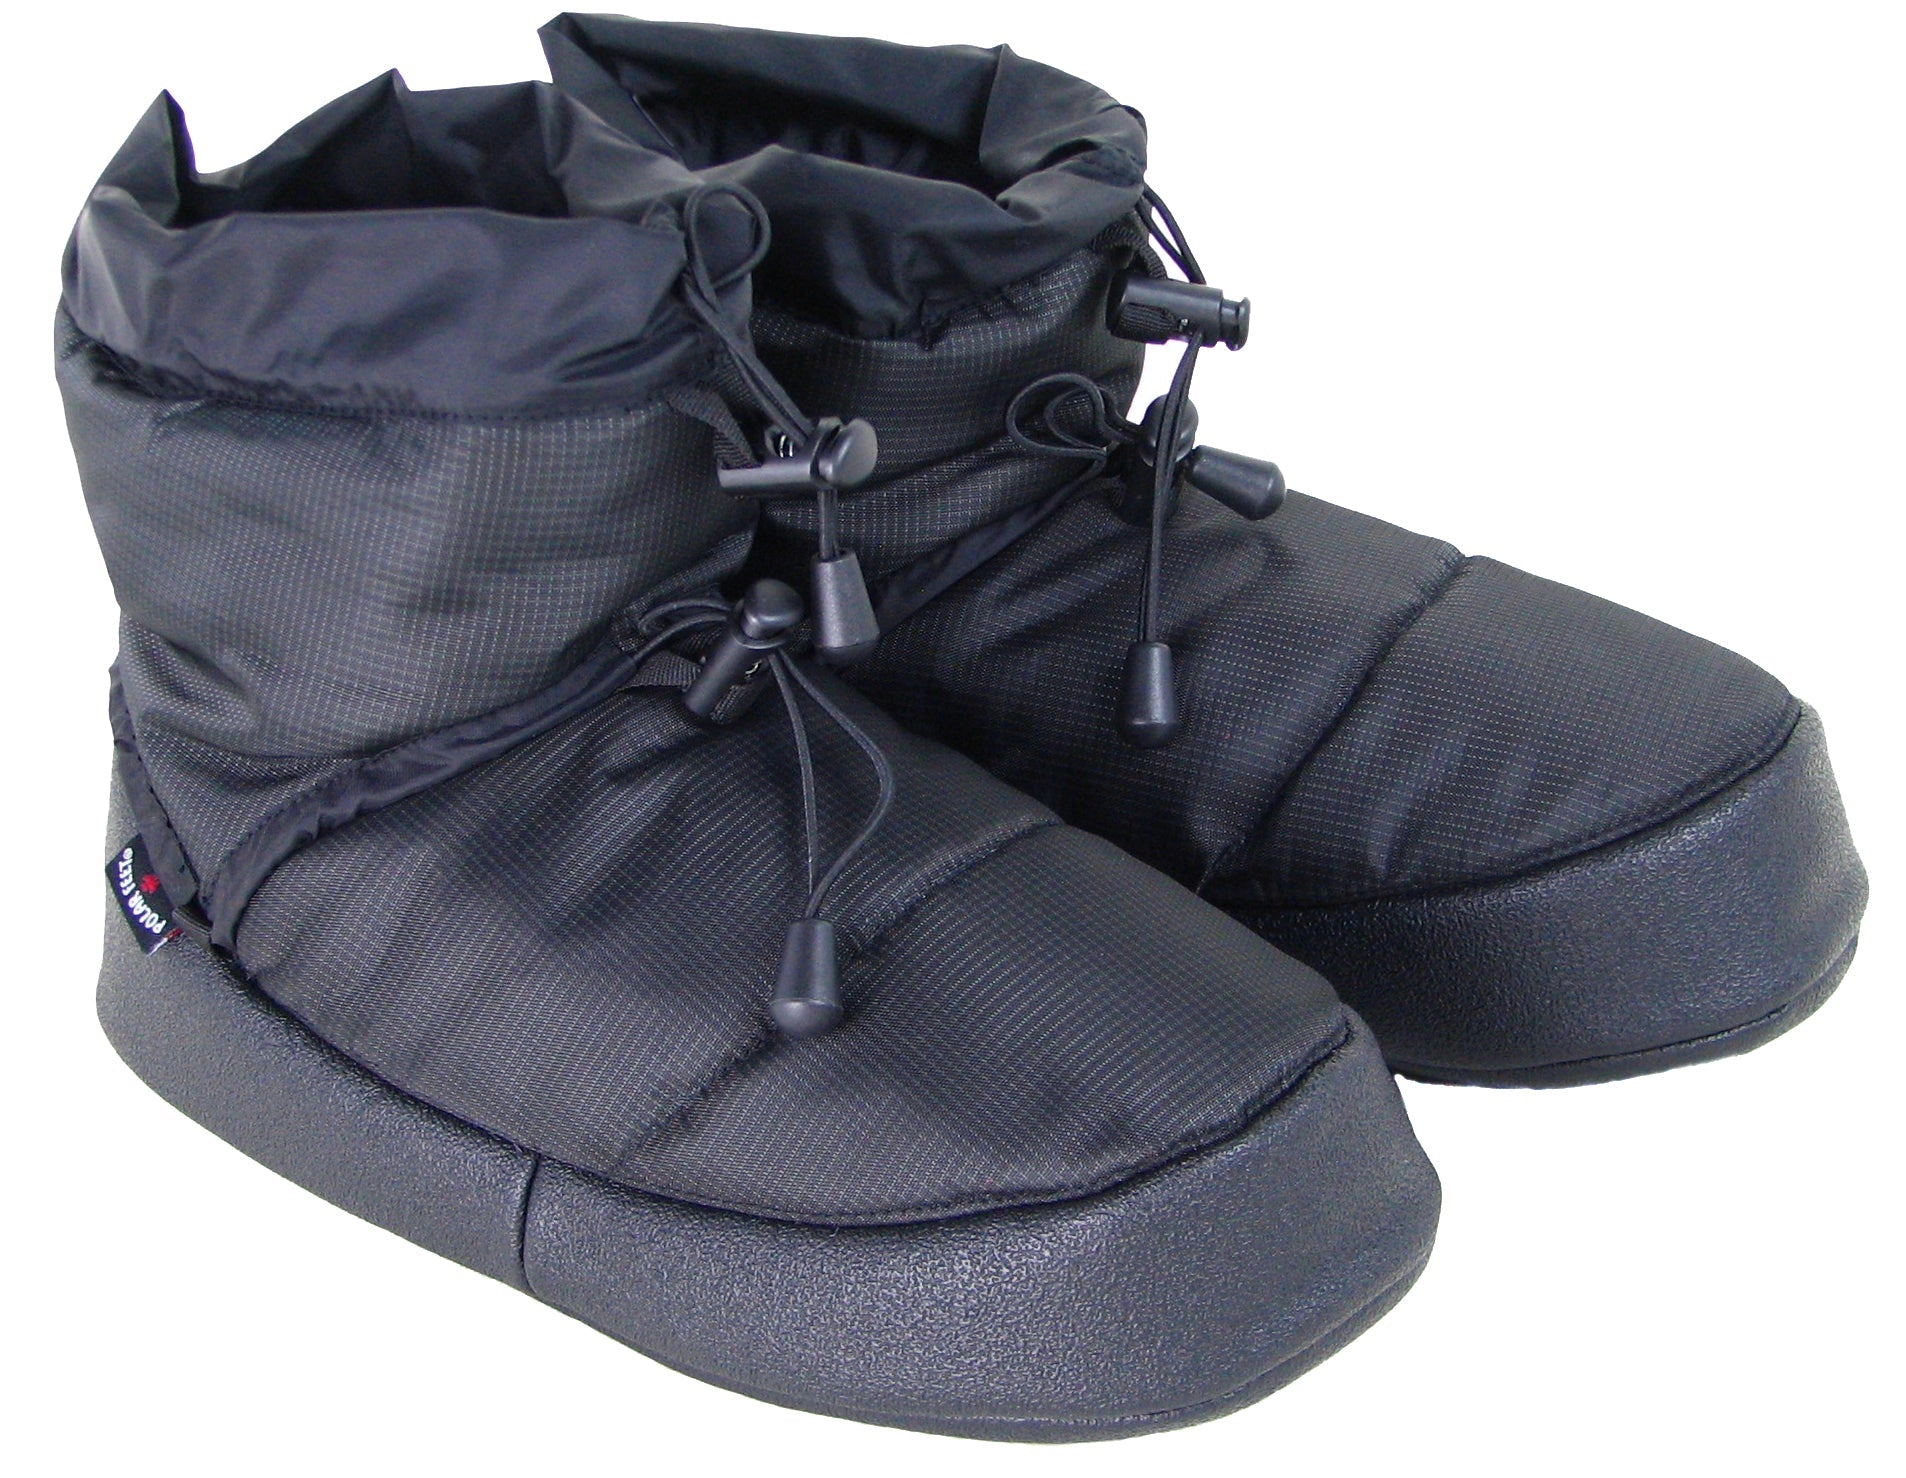 Outerwear-Inspired Slippers : Greys Summit Slipper